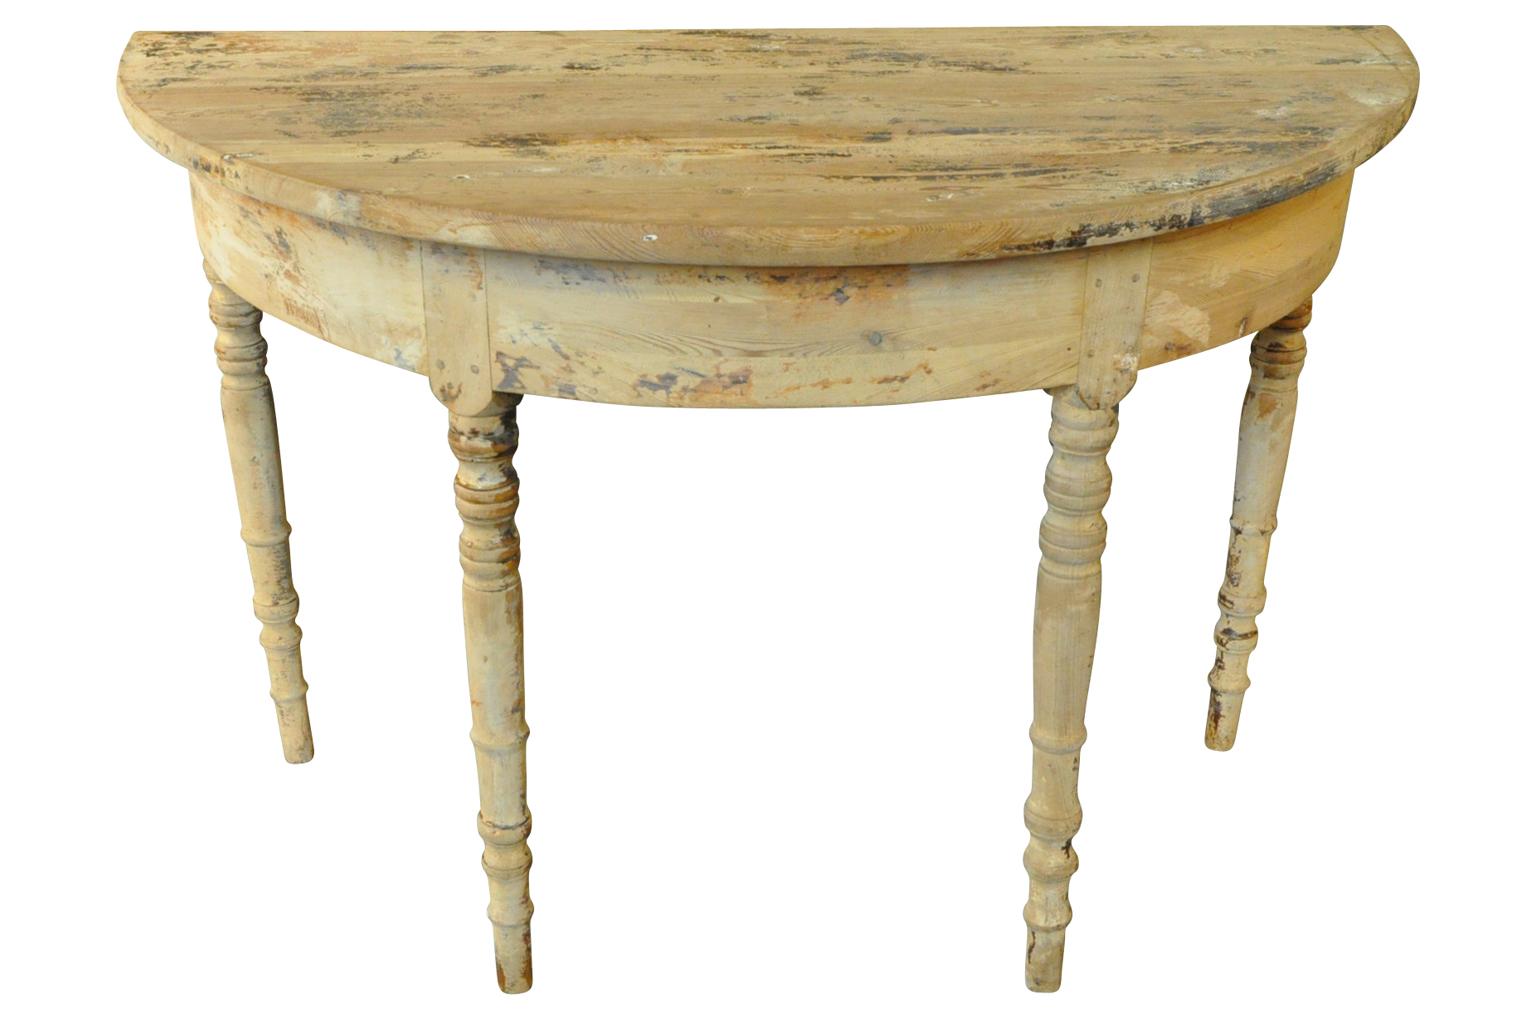 A very charming later 19th century demilune console table from the South of France. Soundly constructed from painted wood with nicely turned legs.